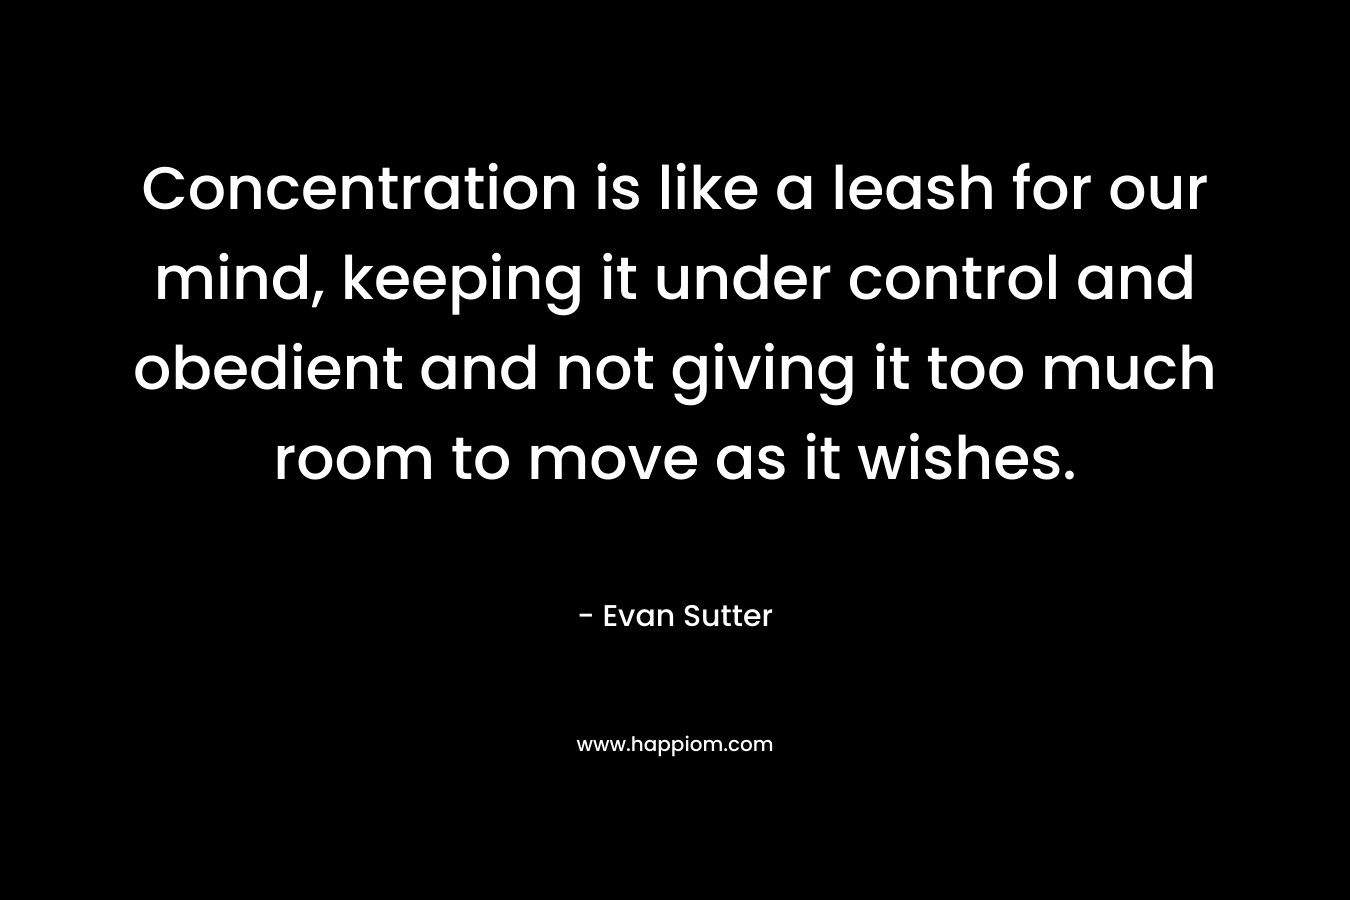 Concentration is like a leash for our mind, keeping it under control and obedient and not giving it too much room to move as it wishes.